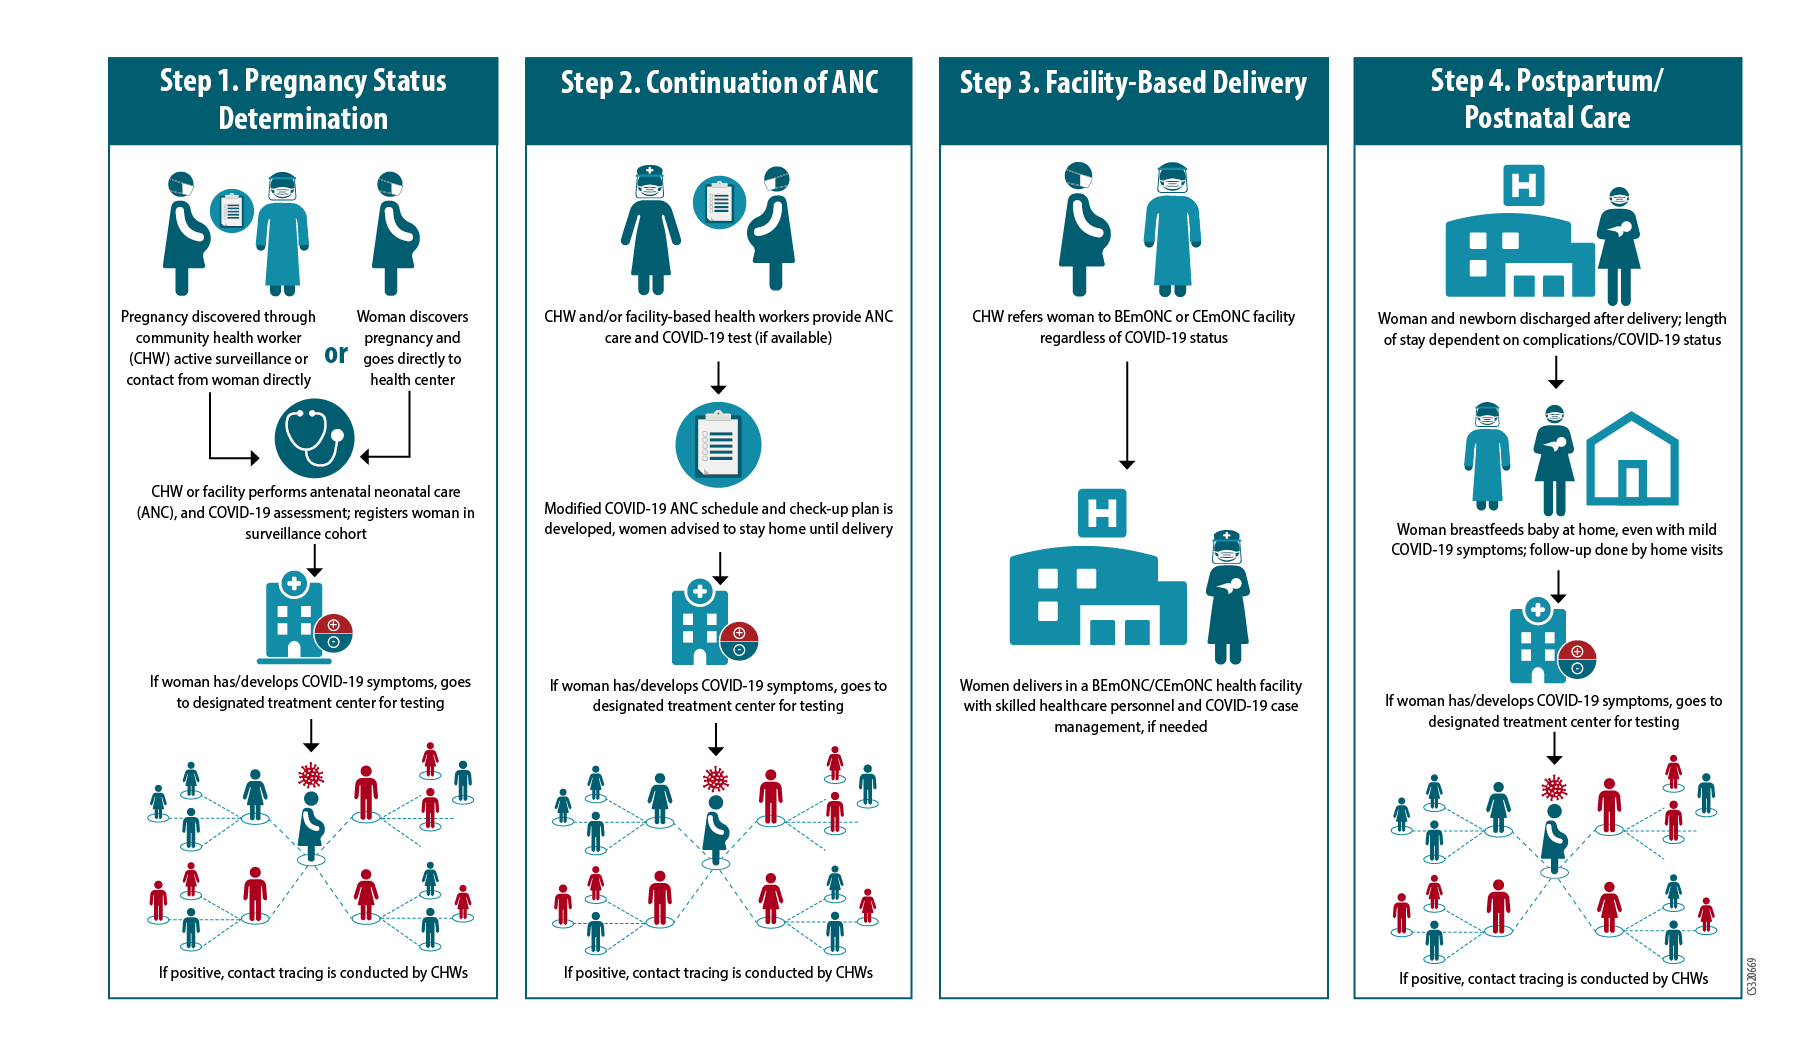 Flow Chart image summarizing steps to take for maternal, neonatal, and child health services during COVID-19